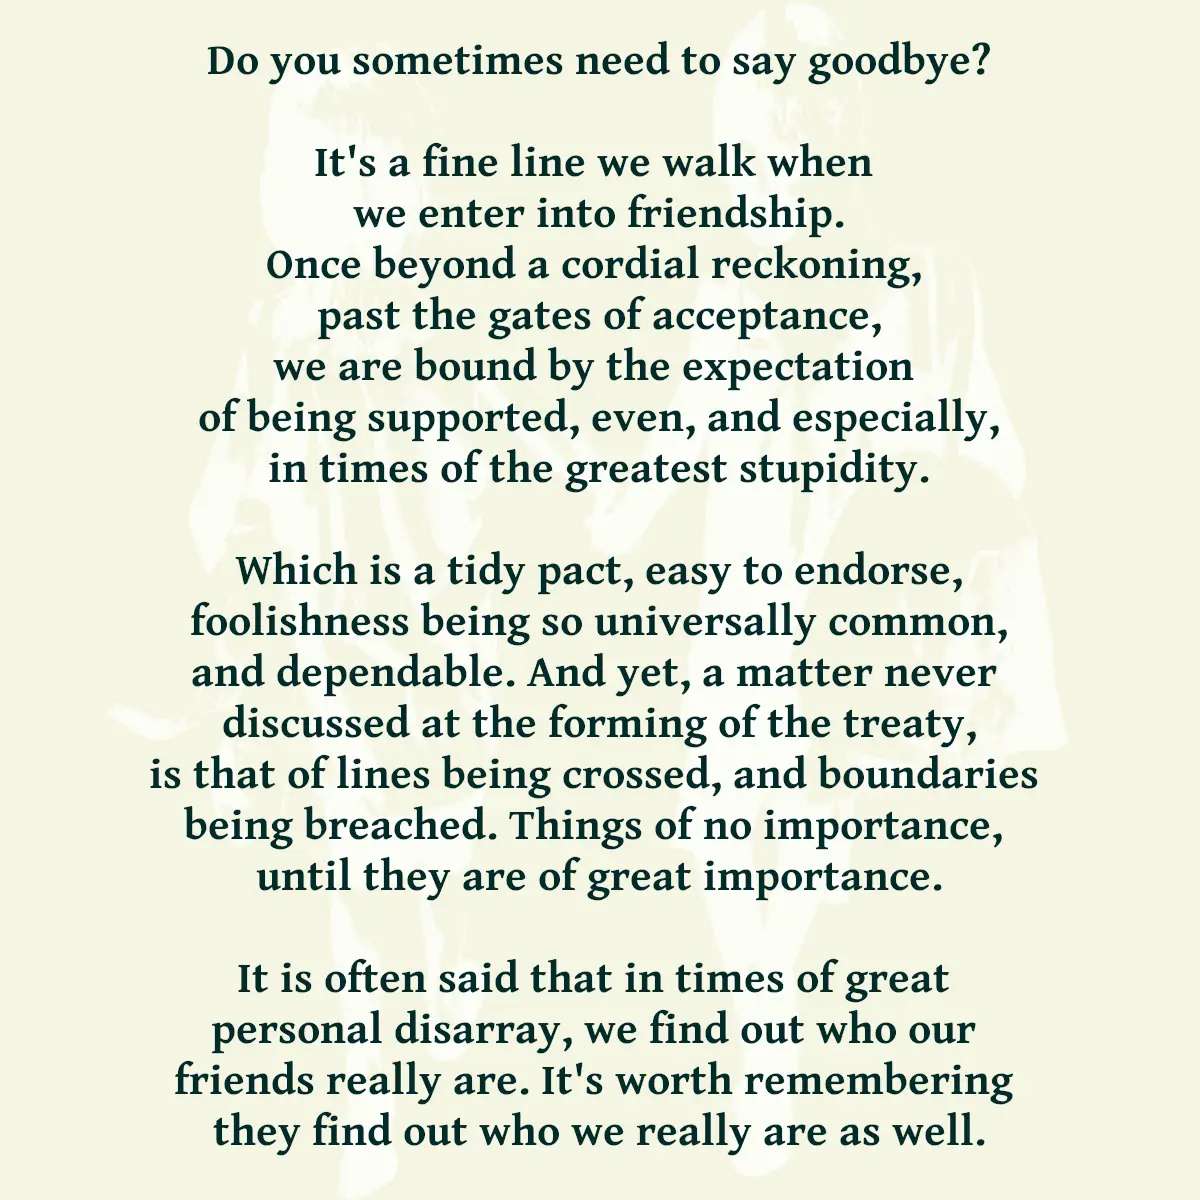 Do you sometimes need to say goodbye? It's a fine line we walk when we enter into friendship. Once beyond a cordial reckoning, past the gates of acceptance, we are bound by the expectation of being supported, even, and especially, in times of the greatest stupidity. Which is a tidy pact, easy to endorse, foolishness being so universally common, and dependable. And yet, a matter never discussed at the forming of the treaty, is that of lines being crossed, and boundaries being breached. Things of no importance, until they are of great importance. It is often said that in times of great personal disarray, we find out who our friends really are. It's worth remembering they find out who we really are as well.